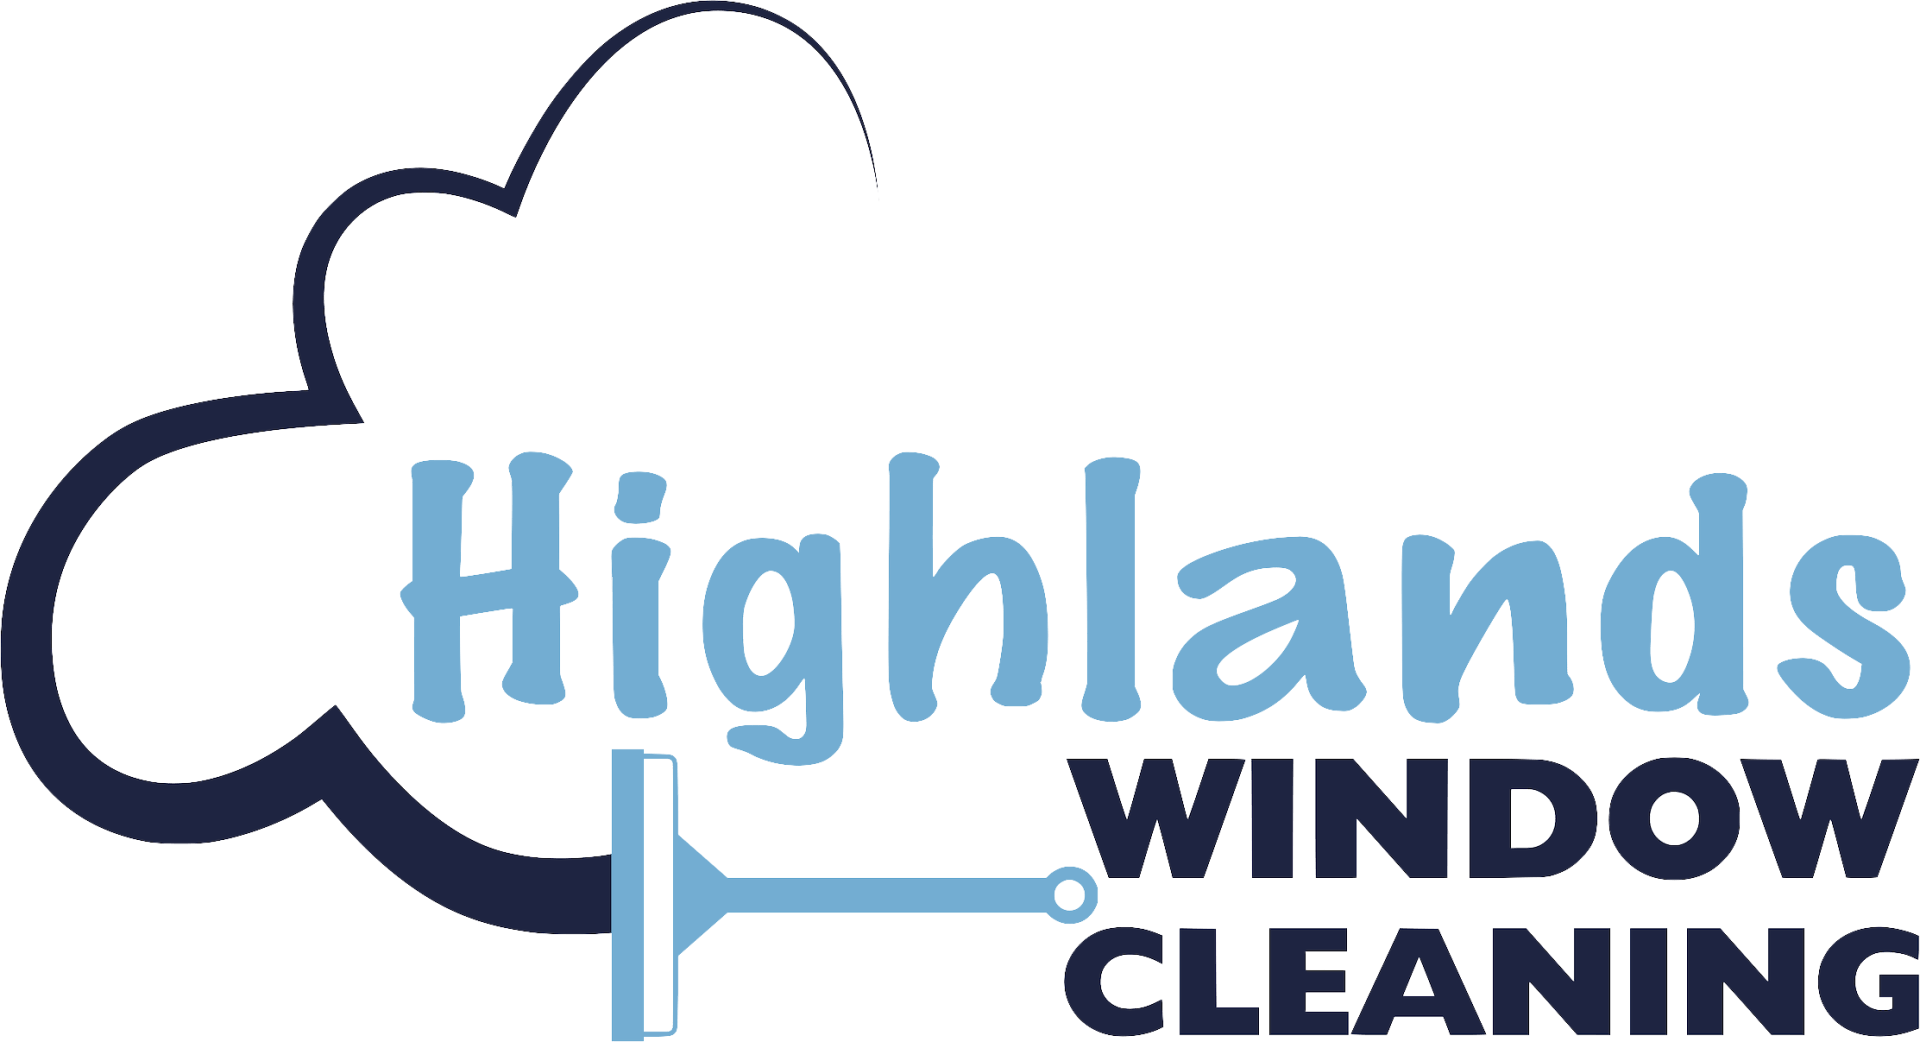 Highlands Window Cleaning: Your Window Cleaners in Mittagong